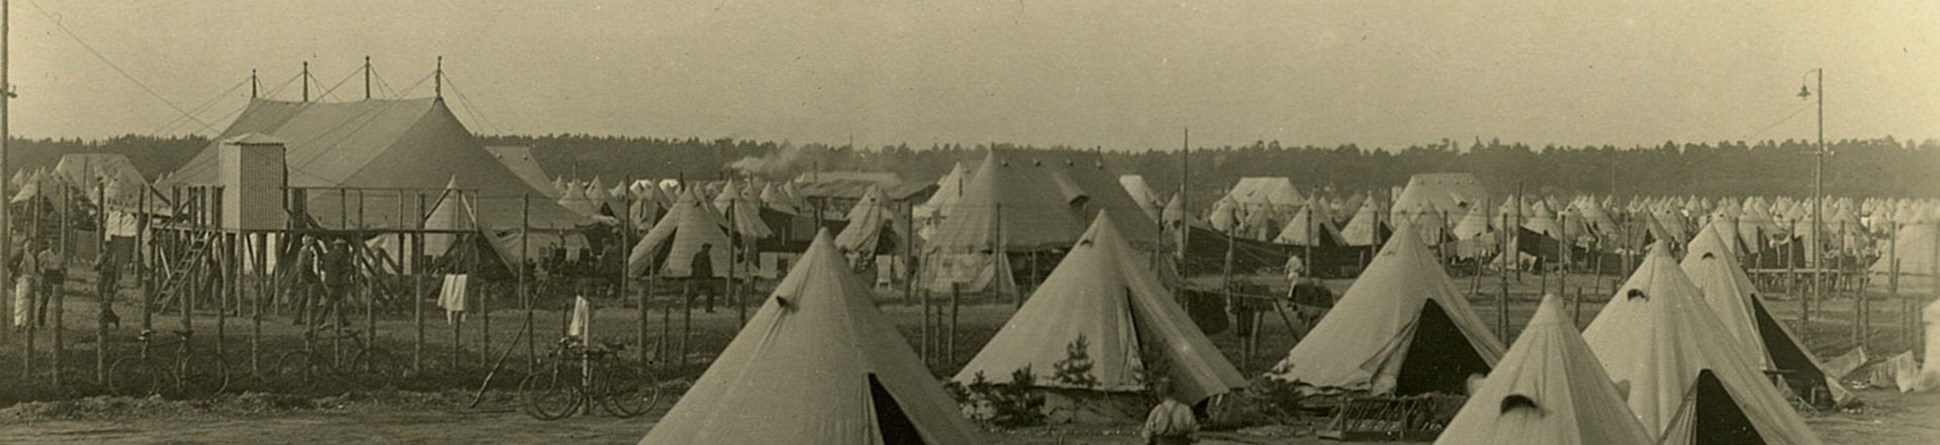 First World War Prisoner of War camp housed in canvas bell tents and large communal tents.